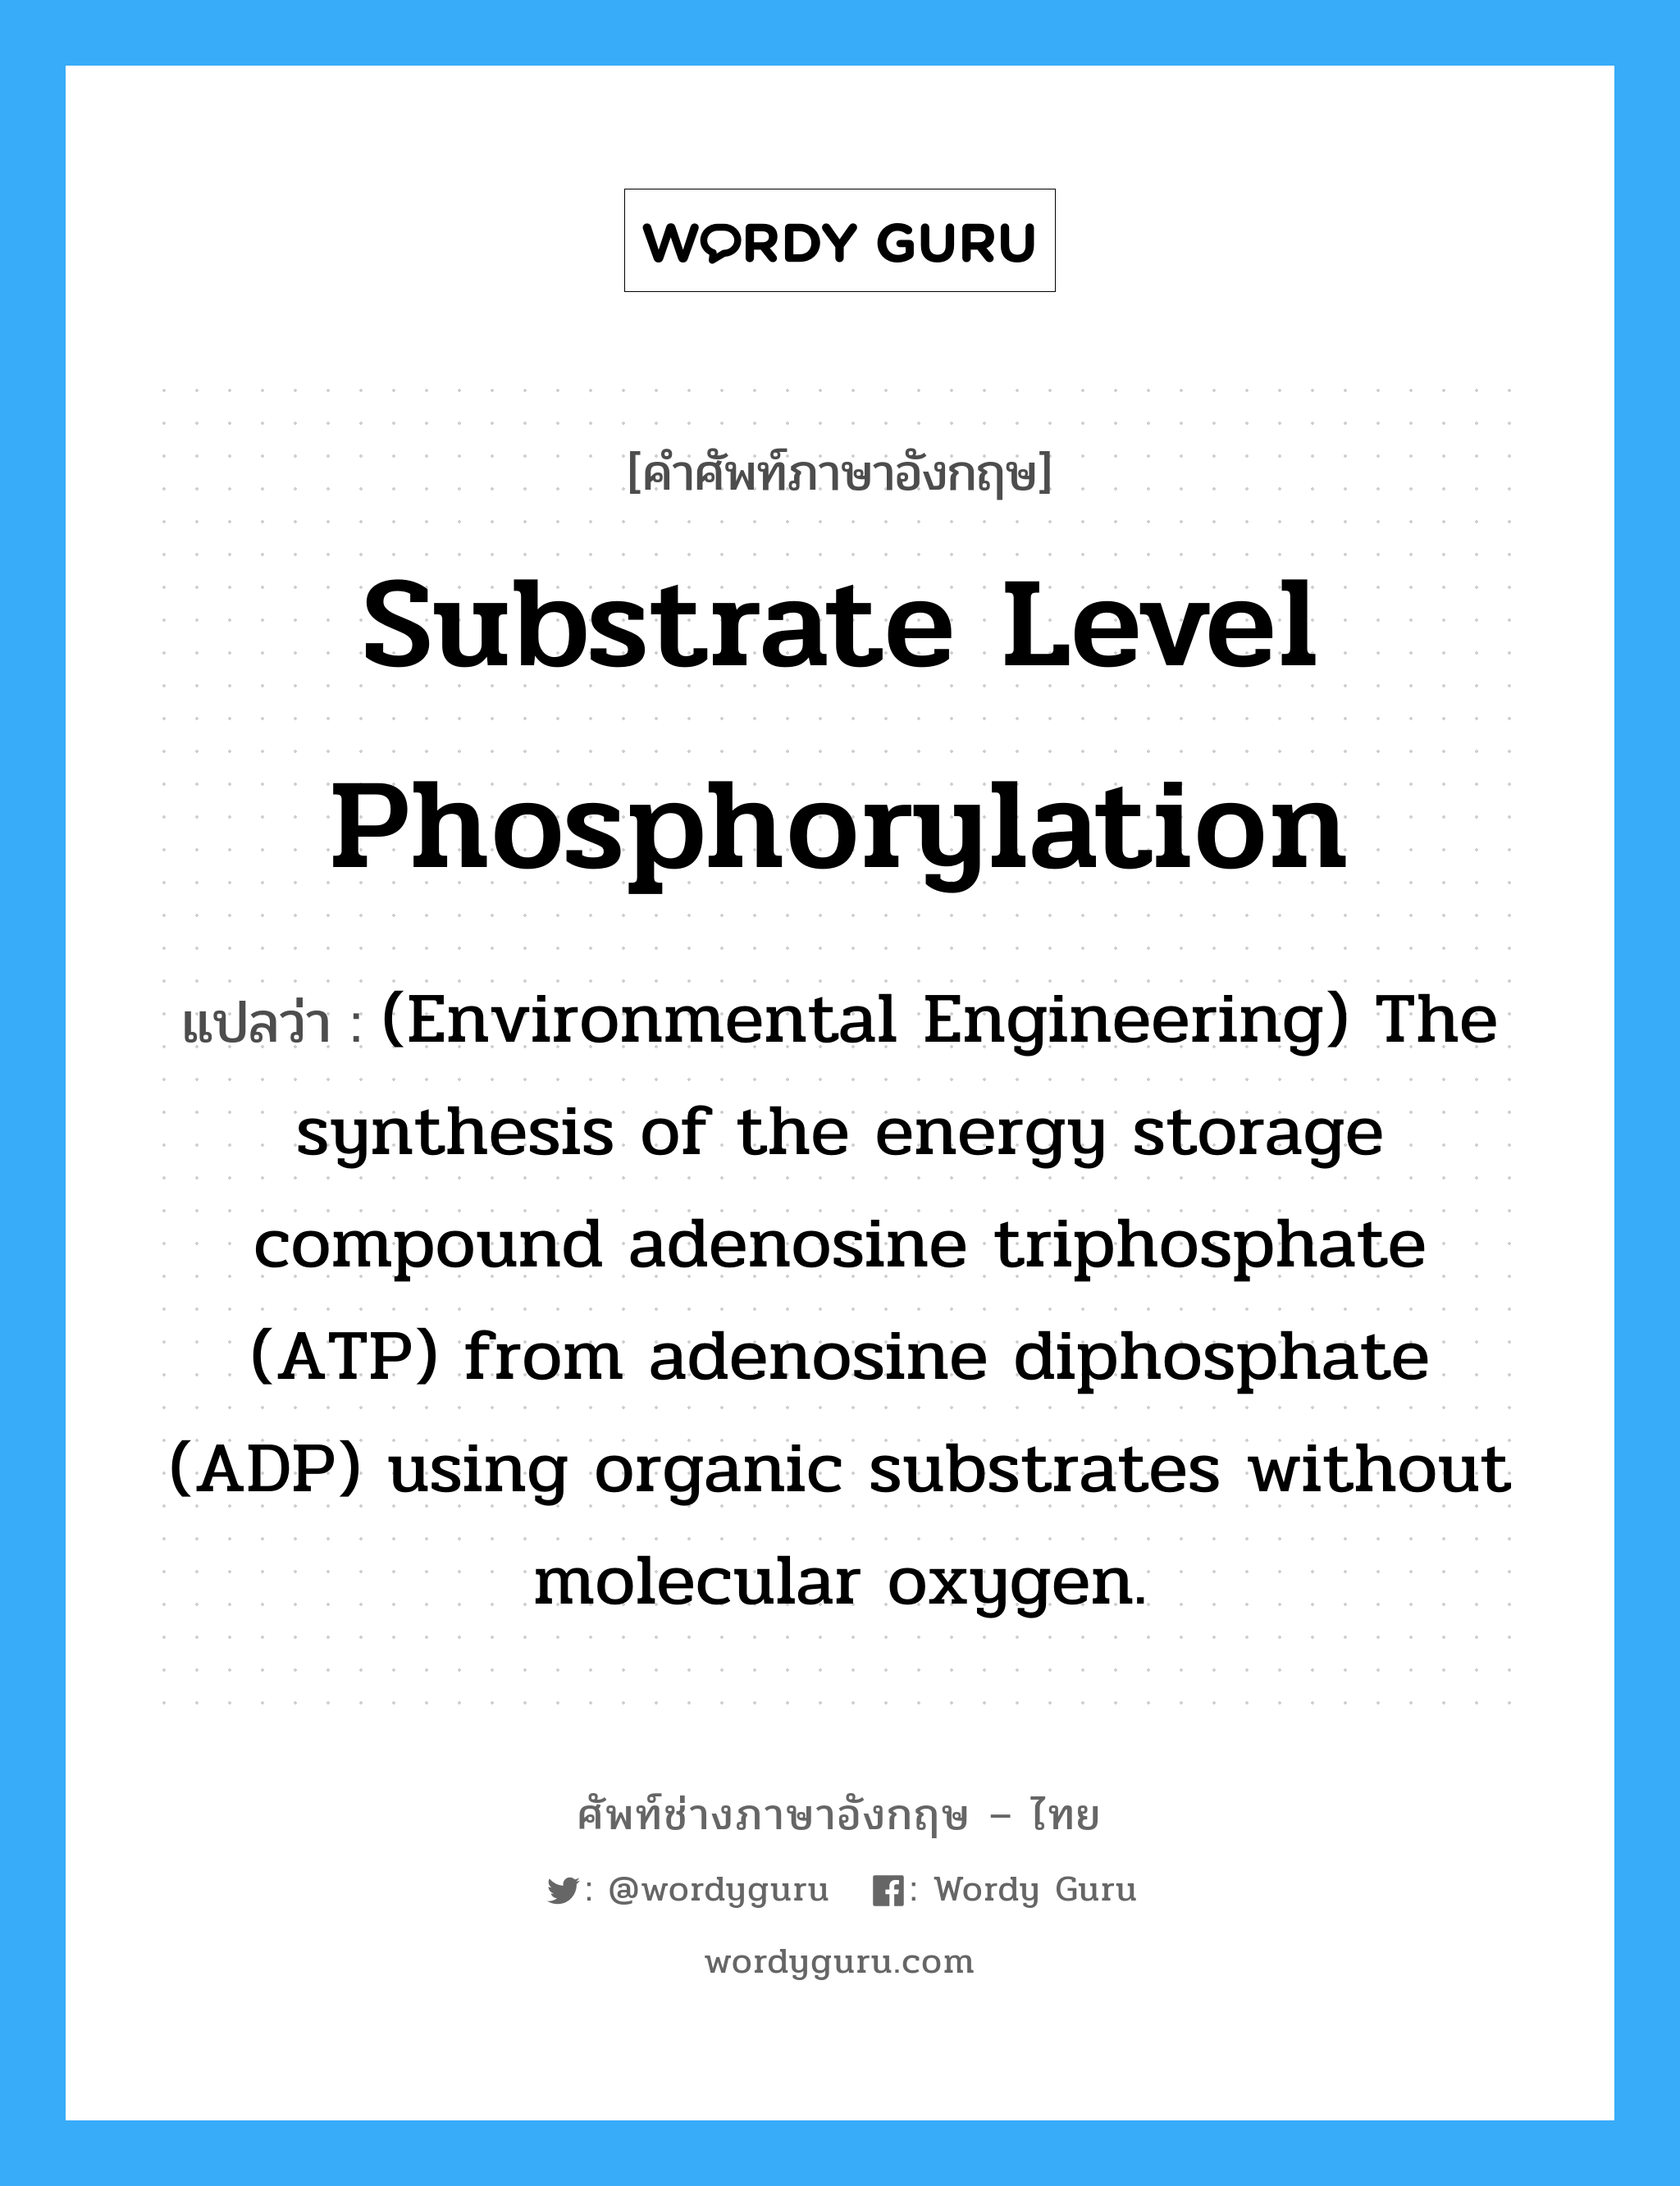 Substrate level phosphorylation แปลว่า?, คำศัพท์ช่างภาษาอังกฤษ - ไทย Substrate level phosphorylation คำศัพท์ภาษาอังกฤษ Substrate level phosphorylation แปลว่า (Environmental Engineering) The synthesis of the energy storage compound adenosine triphosphate (ATP) from adenosine diphosphate (ADP) using organic substrates without molecular oxygen.